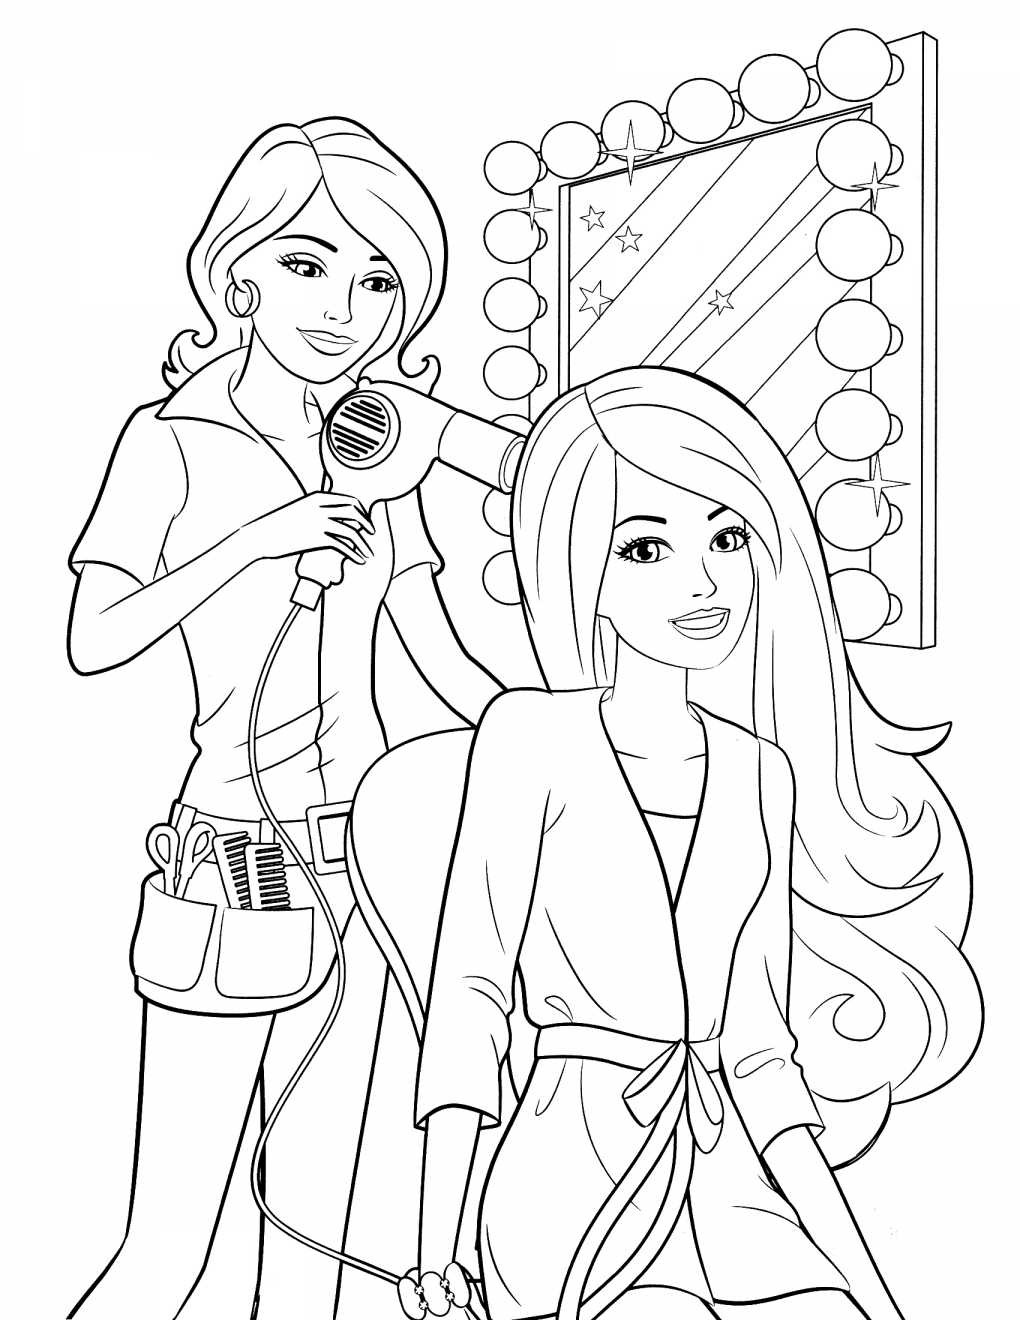 Barbie Coloring Pages to Print Wallpaper